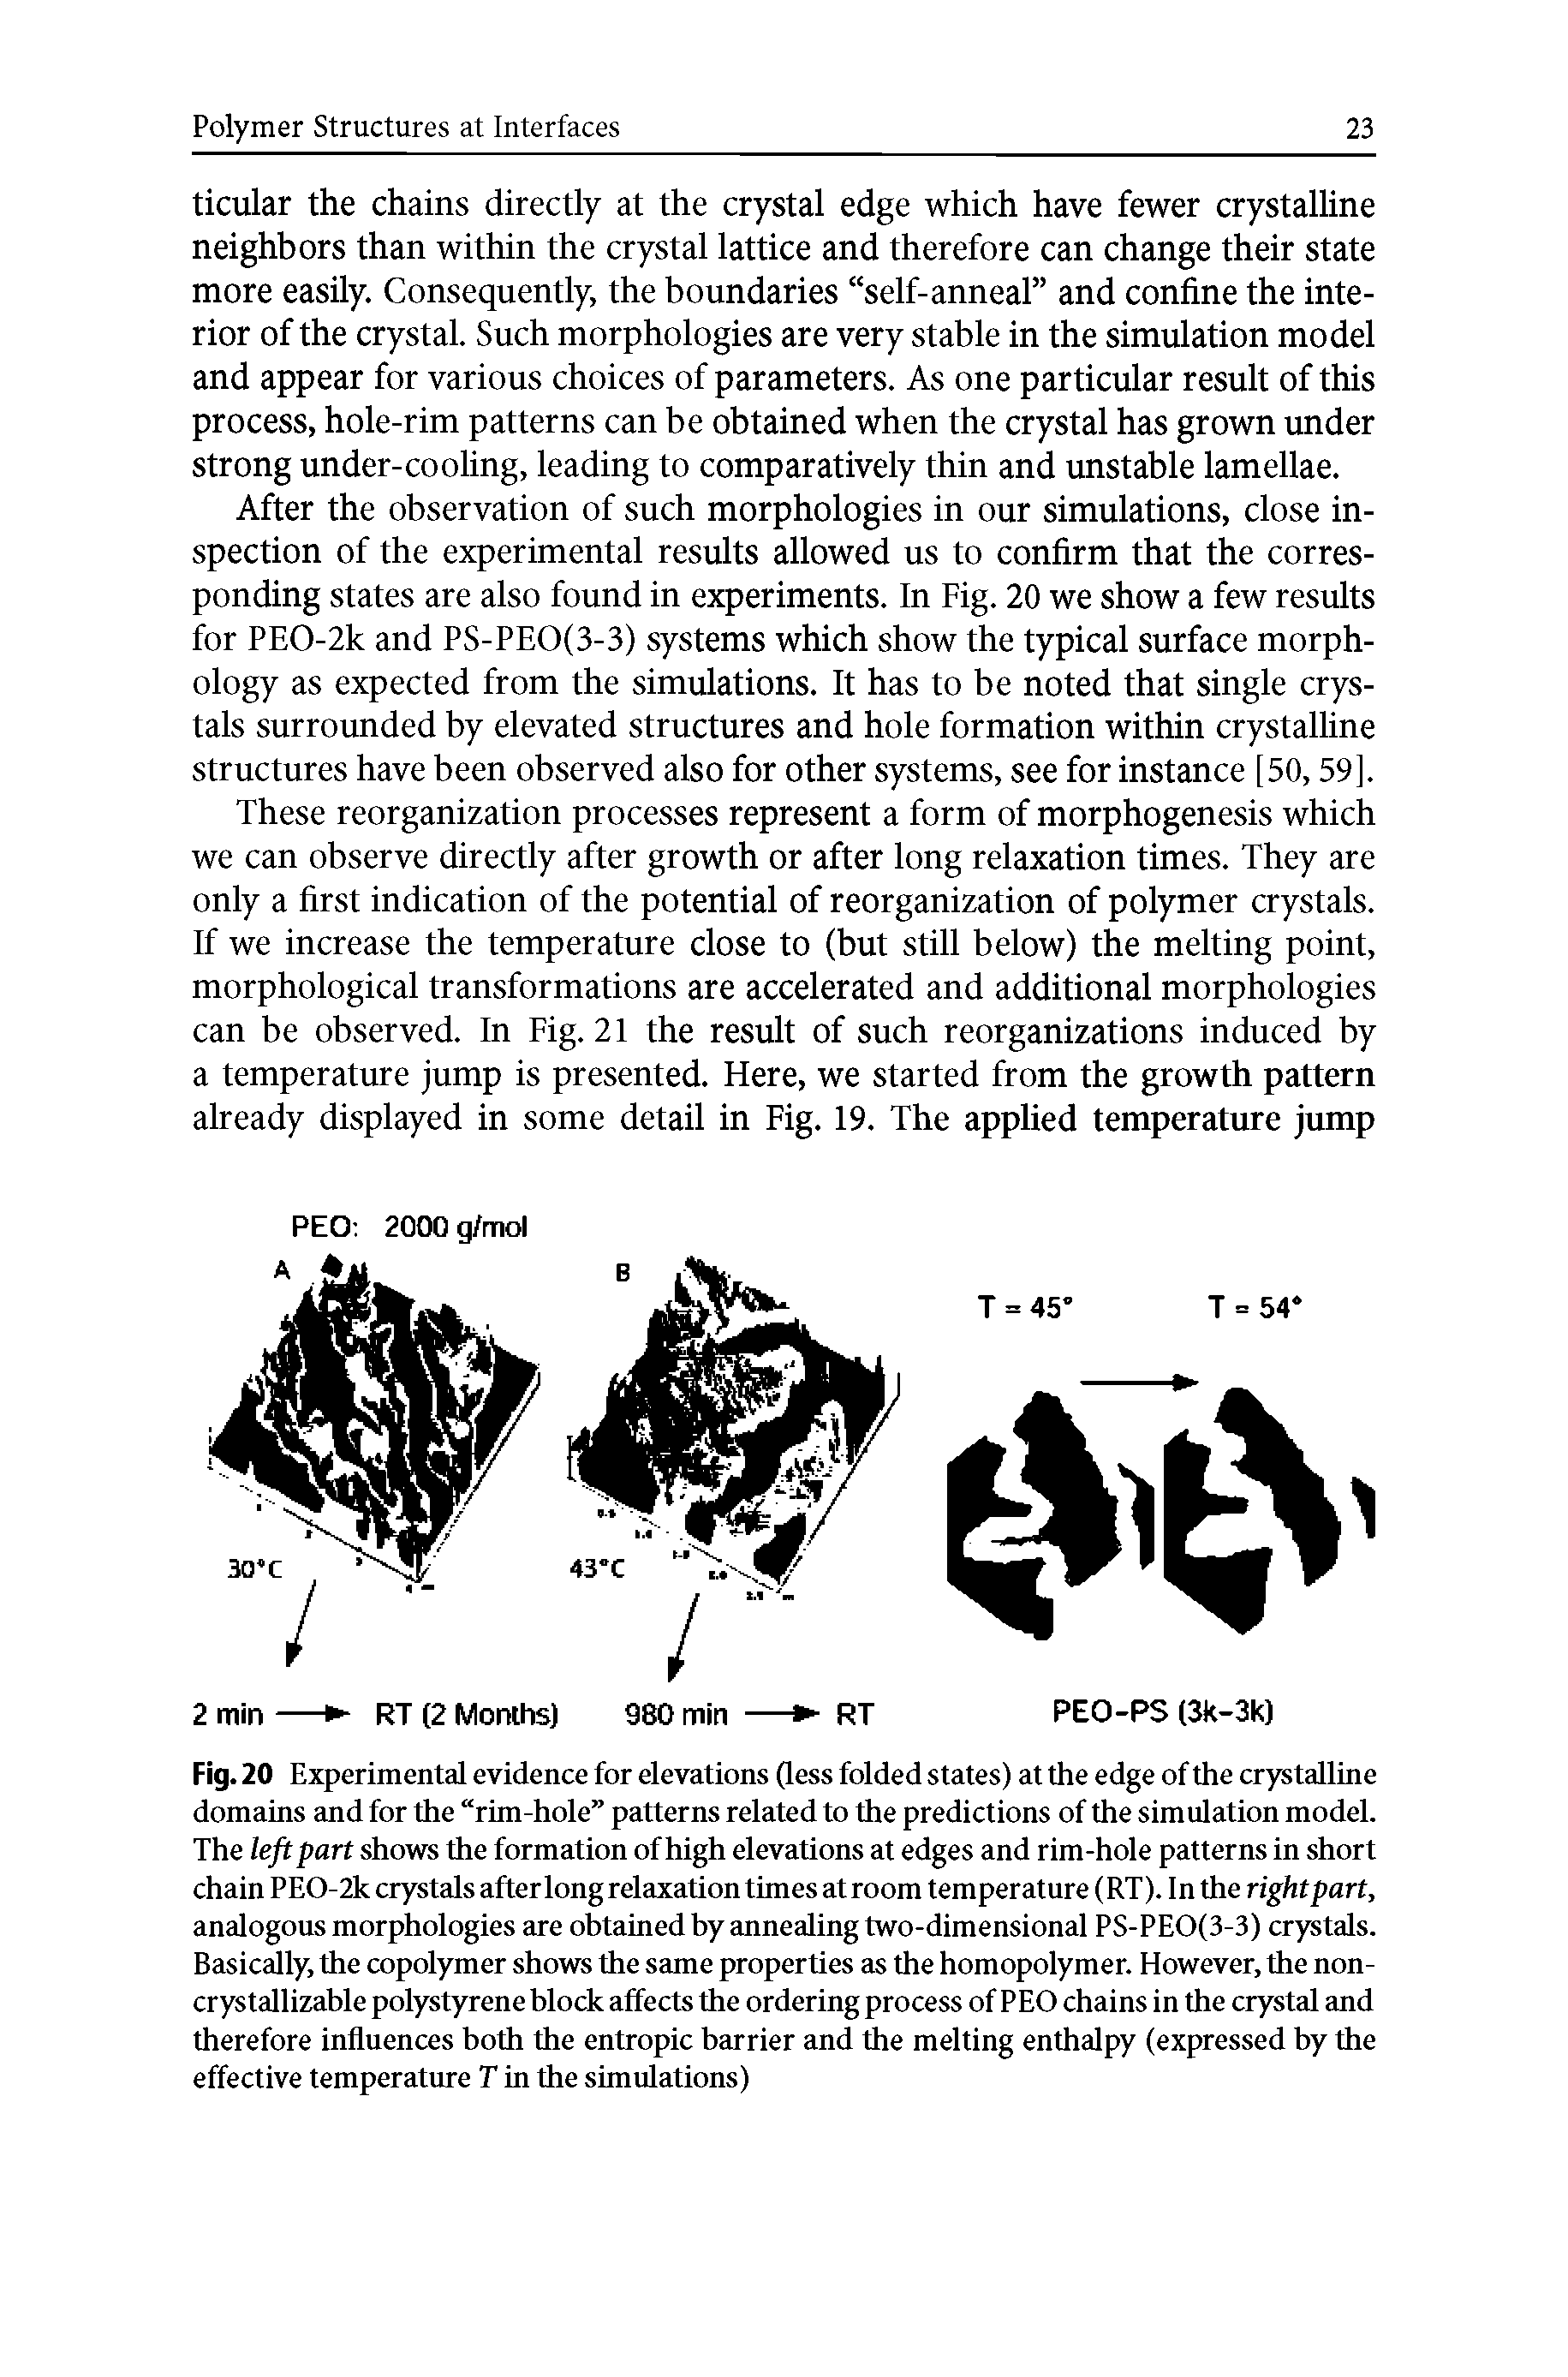 Fig. 20 Experimental evidence for elevations Qess folded states) at the edge of the crystalline domains and for the rim-hole patterns related to the predictions of the simulation model. The left part shows the formation of high elevations at edges and rim-hole patterns in short chain PEO-2k crystals after long relaxation times at room temperature (RT). In the right part, analogous morphologies are obtained by annealing two-dimensional PS-PEO(3-3) crystals. Basicidly, the copolymer shows the same properties as the homopolymer. However, the non-crystallizable polystyrene block affects the ordering process of PEO chains in the crystal and therefore influences both the entropic barrier and the melting enthalpy (expressed by the effective temperature T in the simulations)...